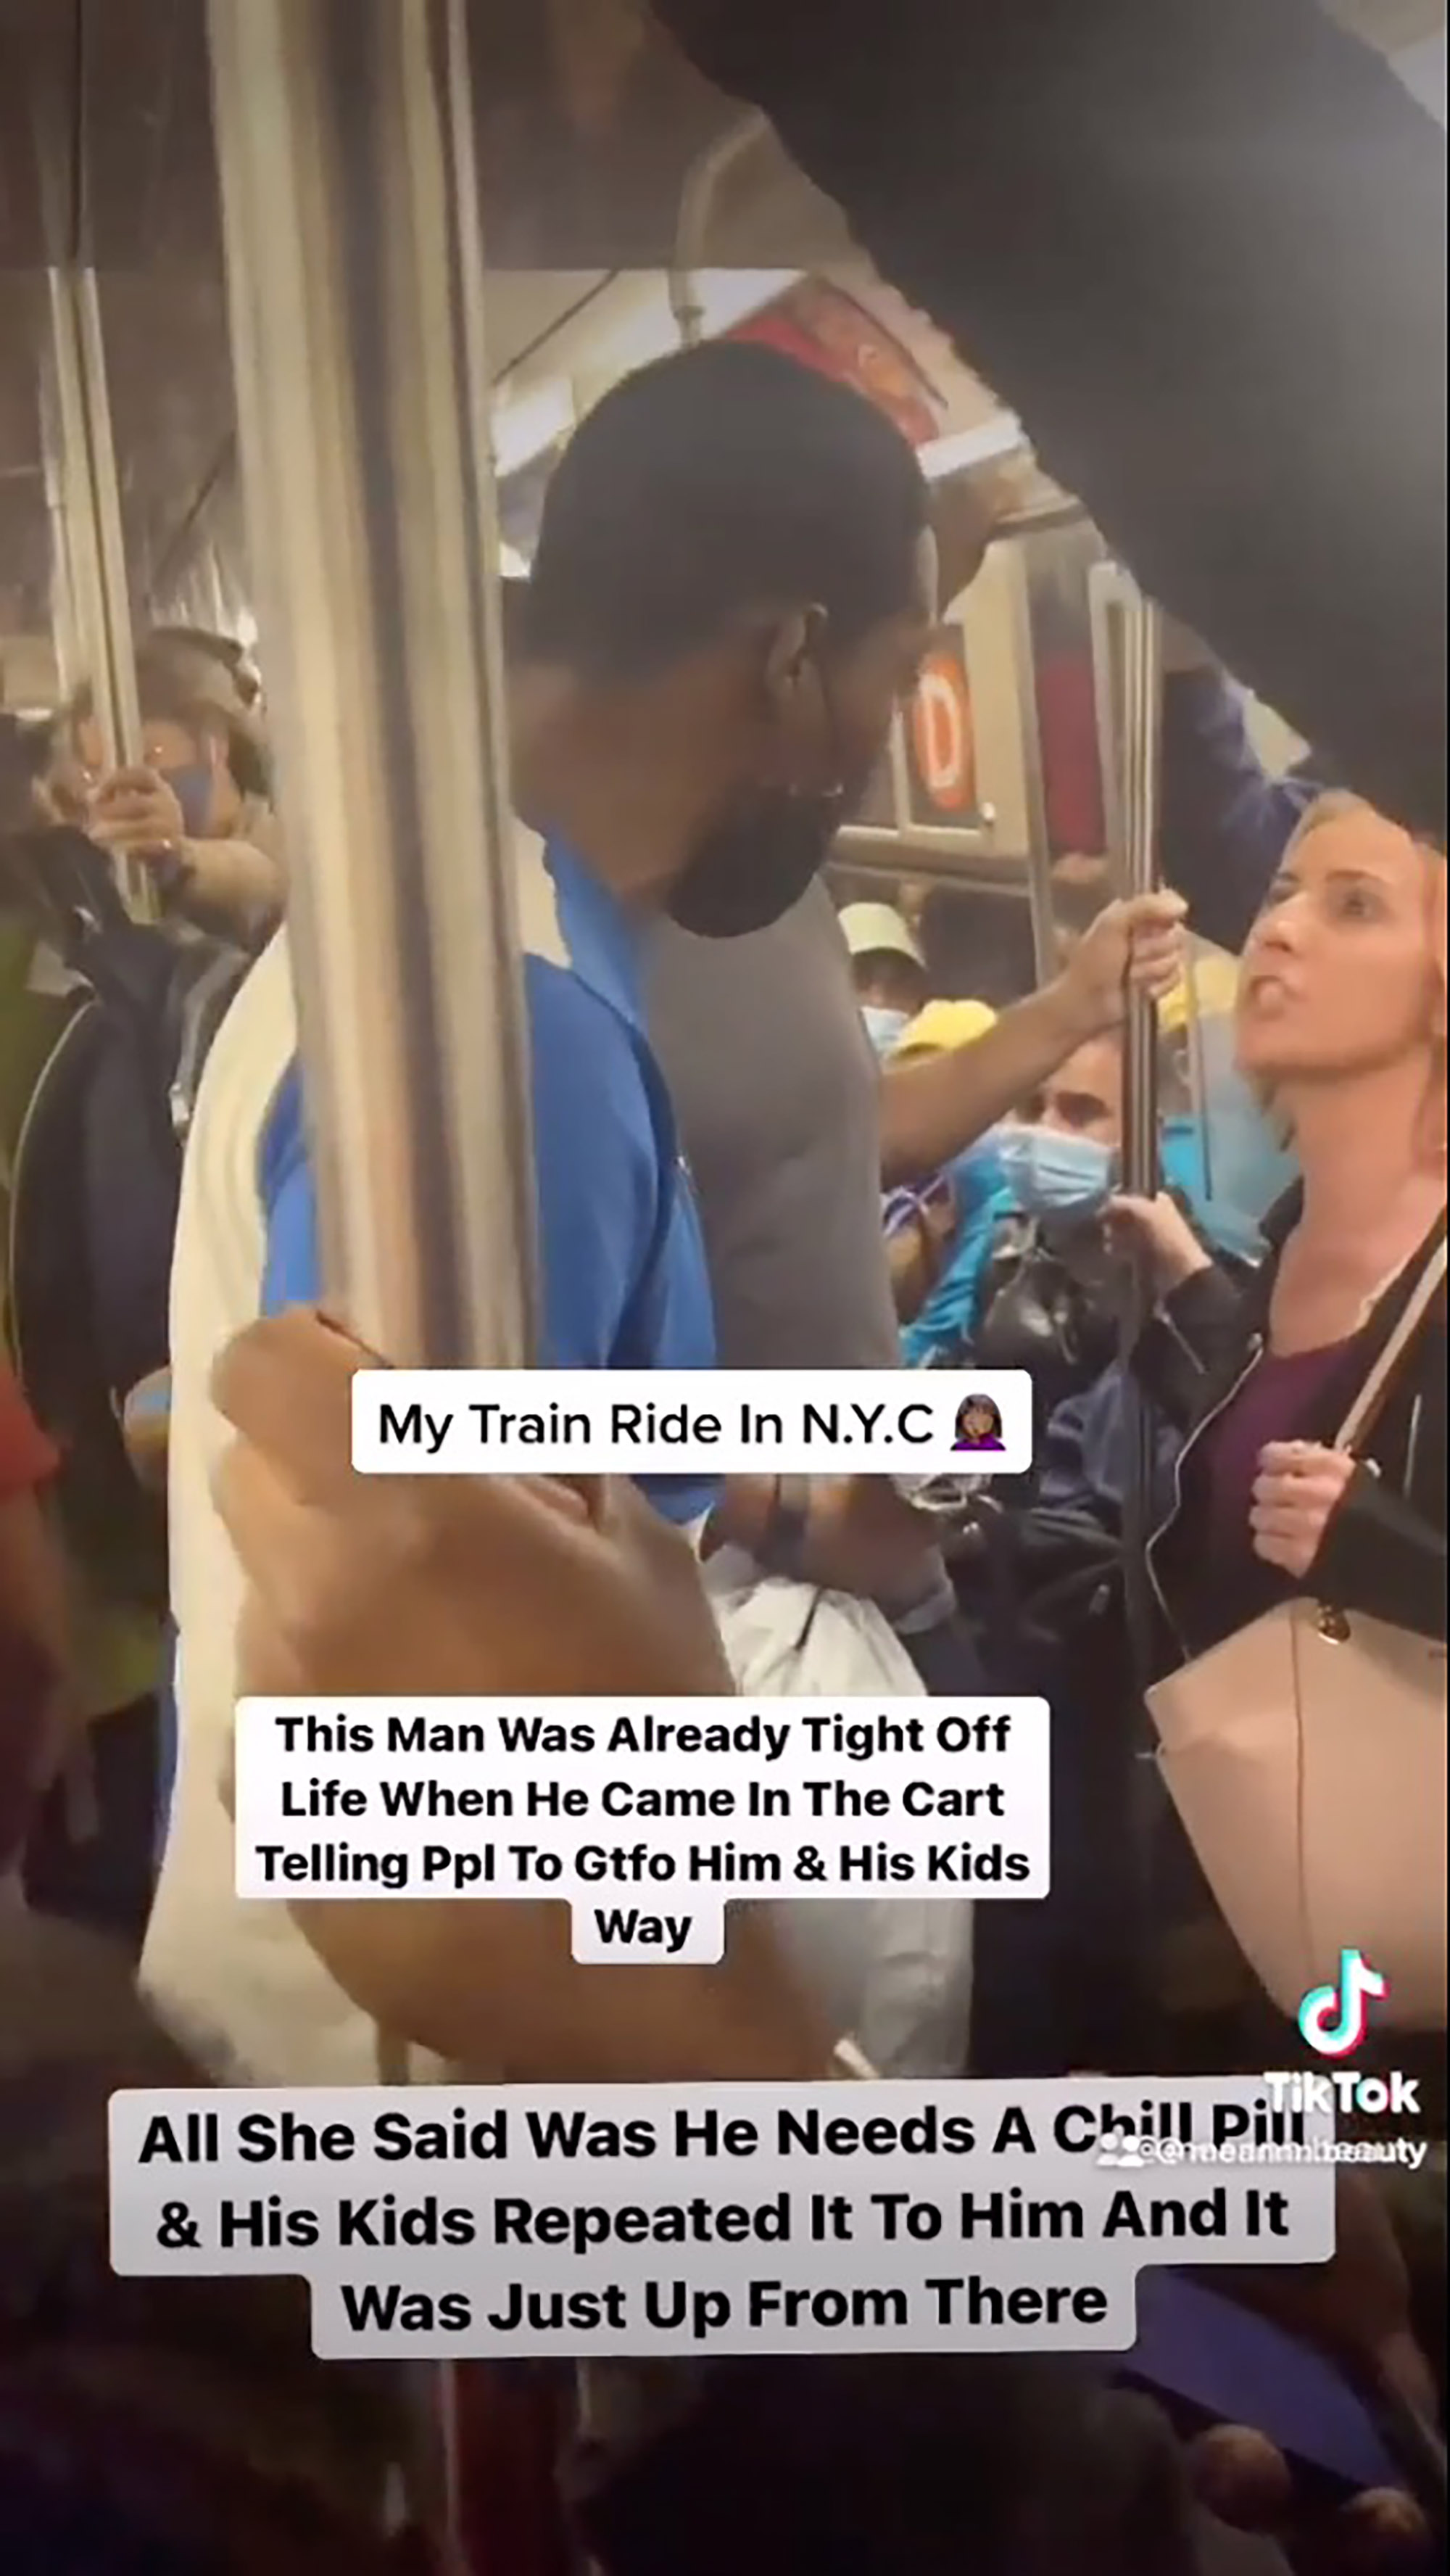 The man and woman seen arguing on the train.